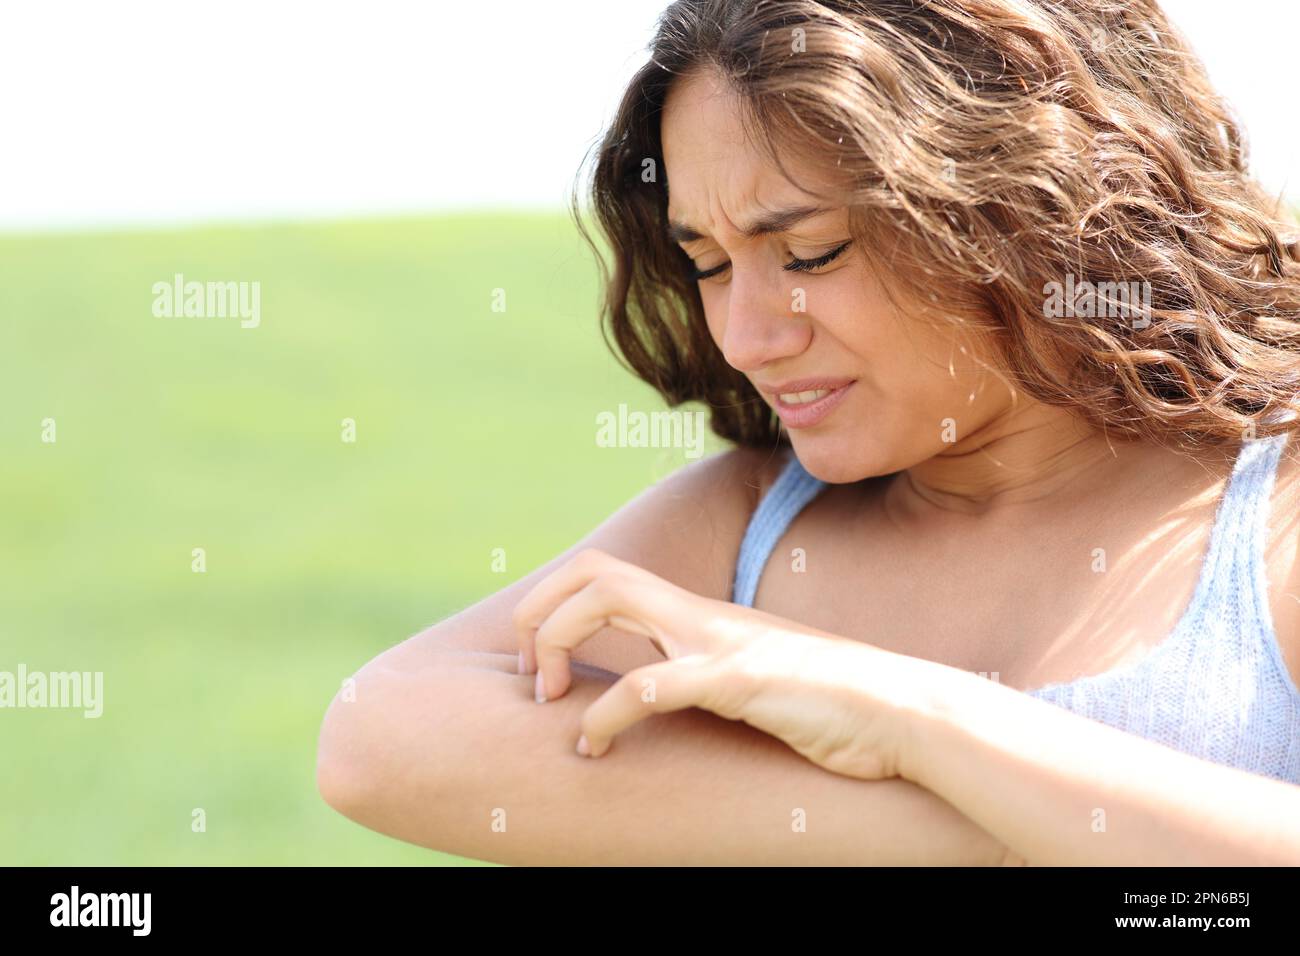 Woman scratching itchy arm in a field Stock Photo